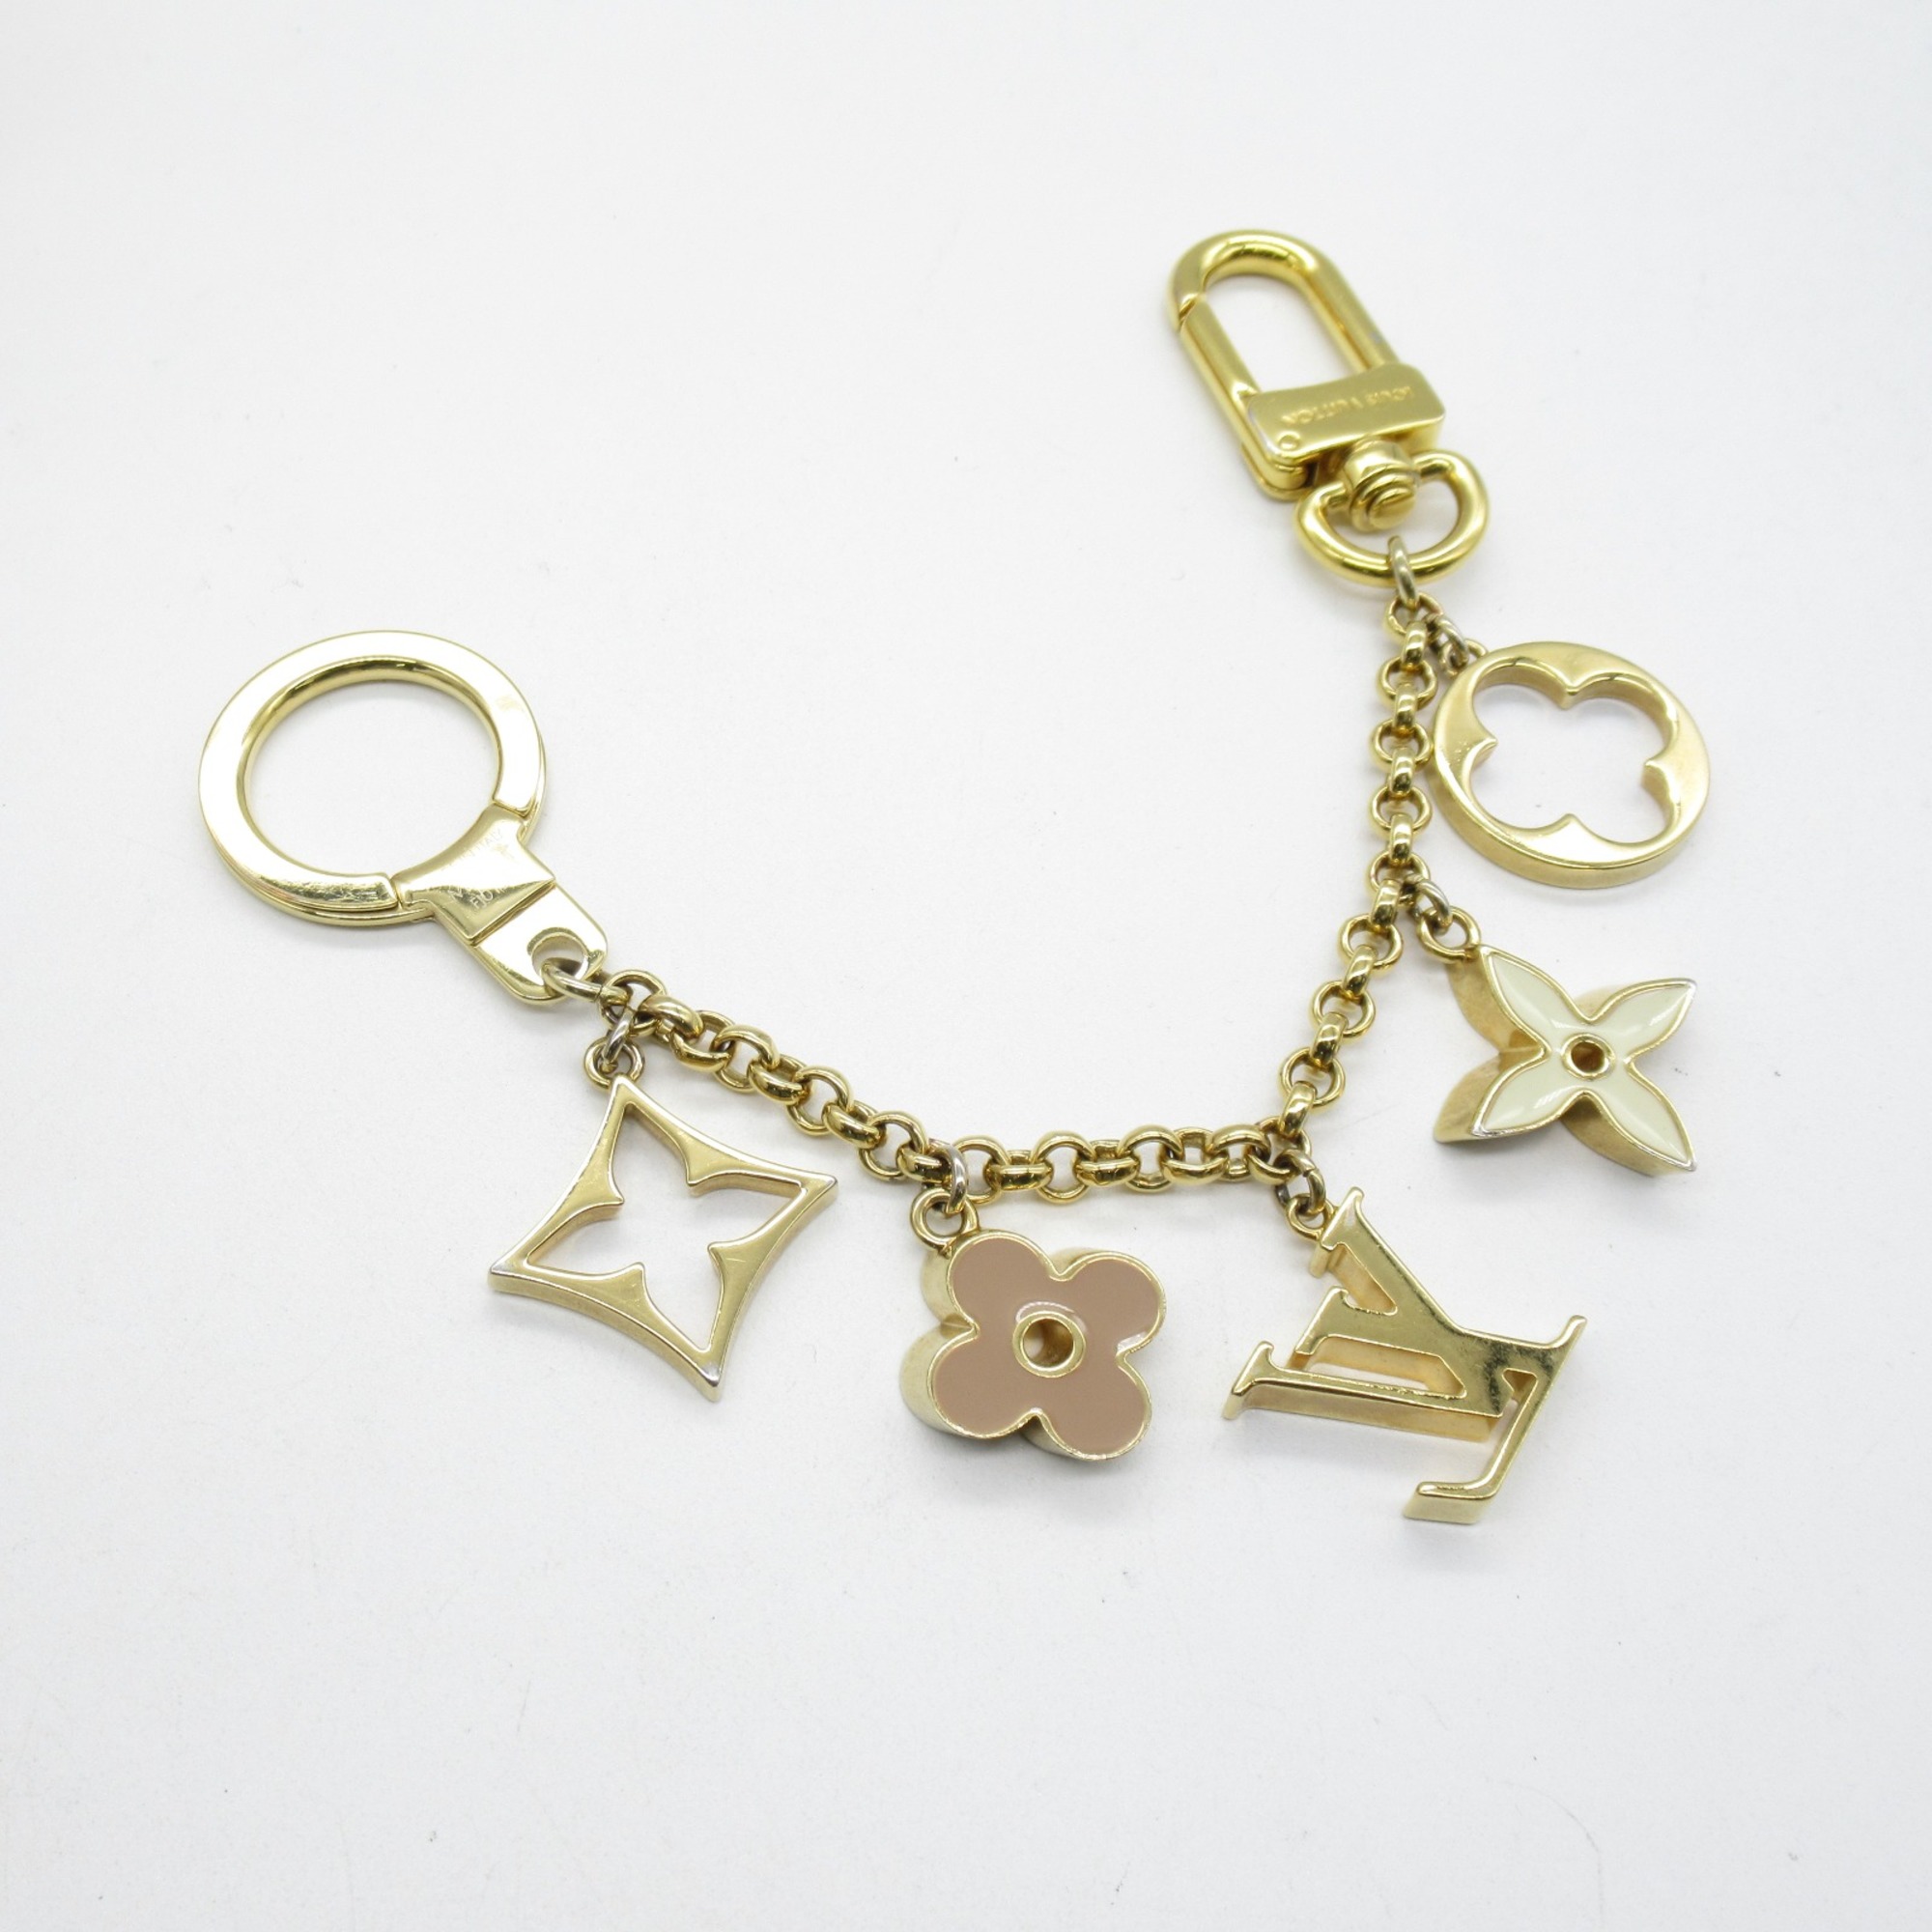 LOUIS VUITTON Key ring Gold Gold Plated M65111